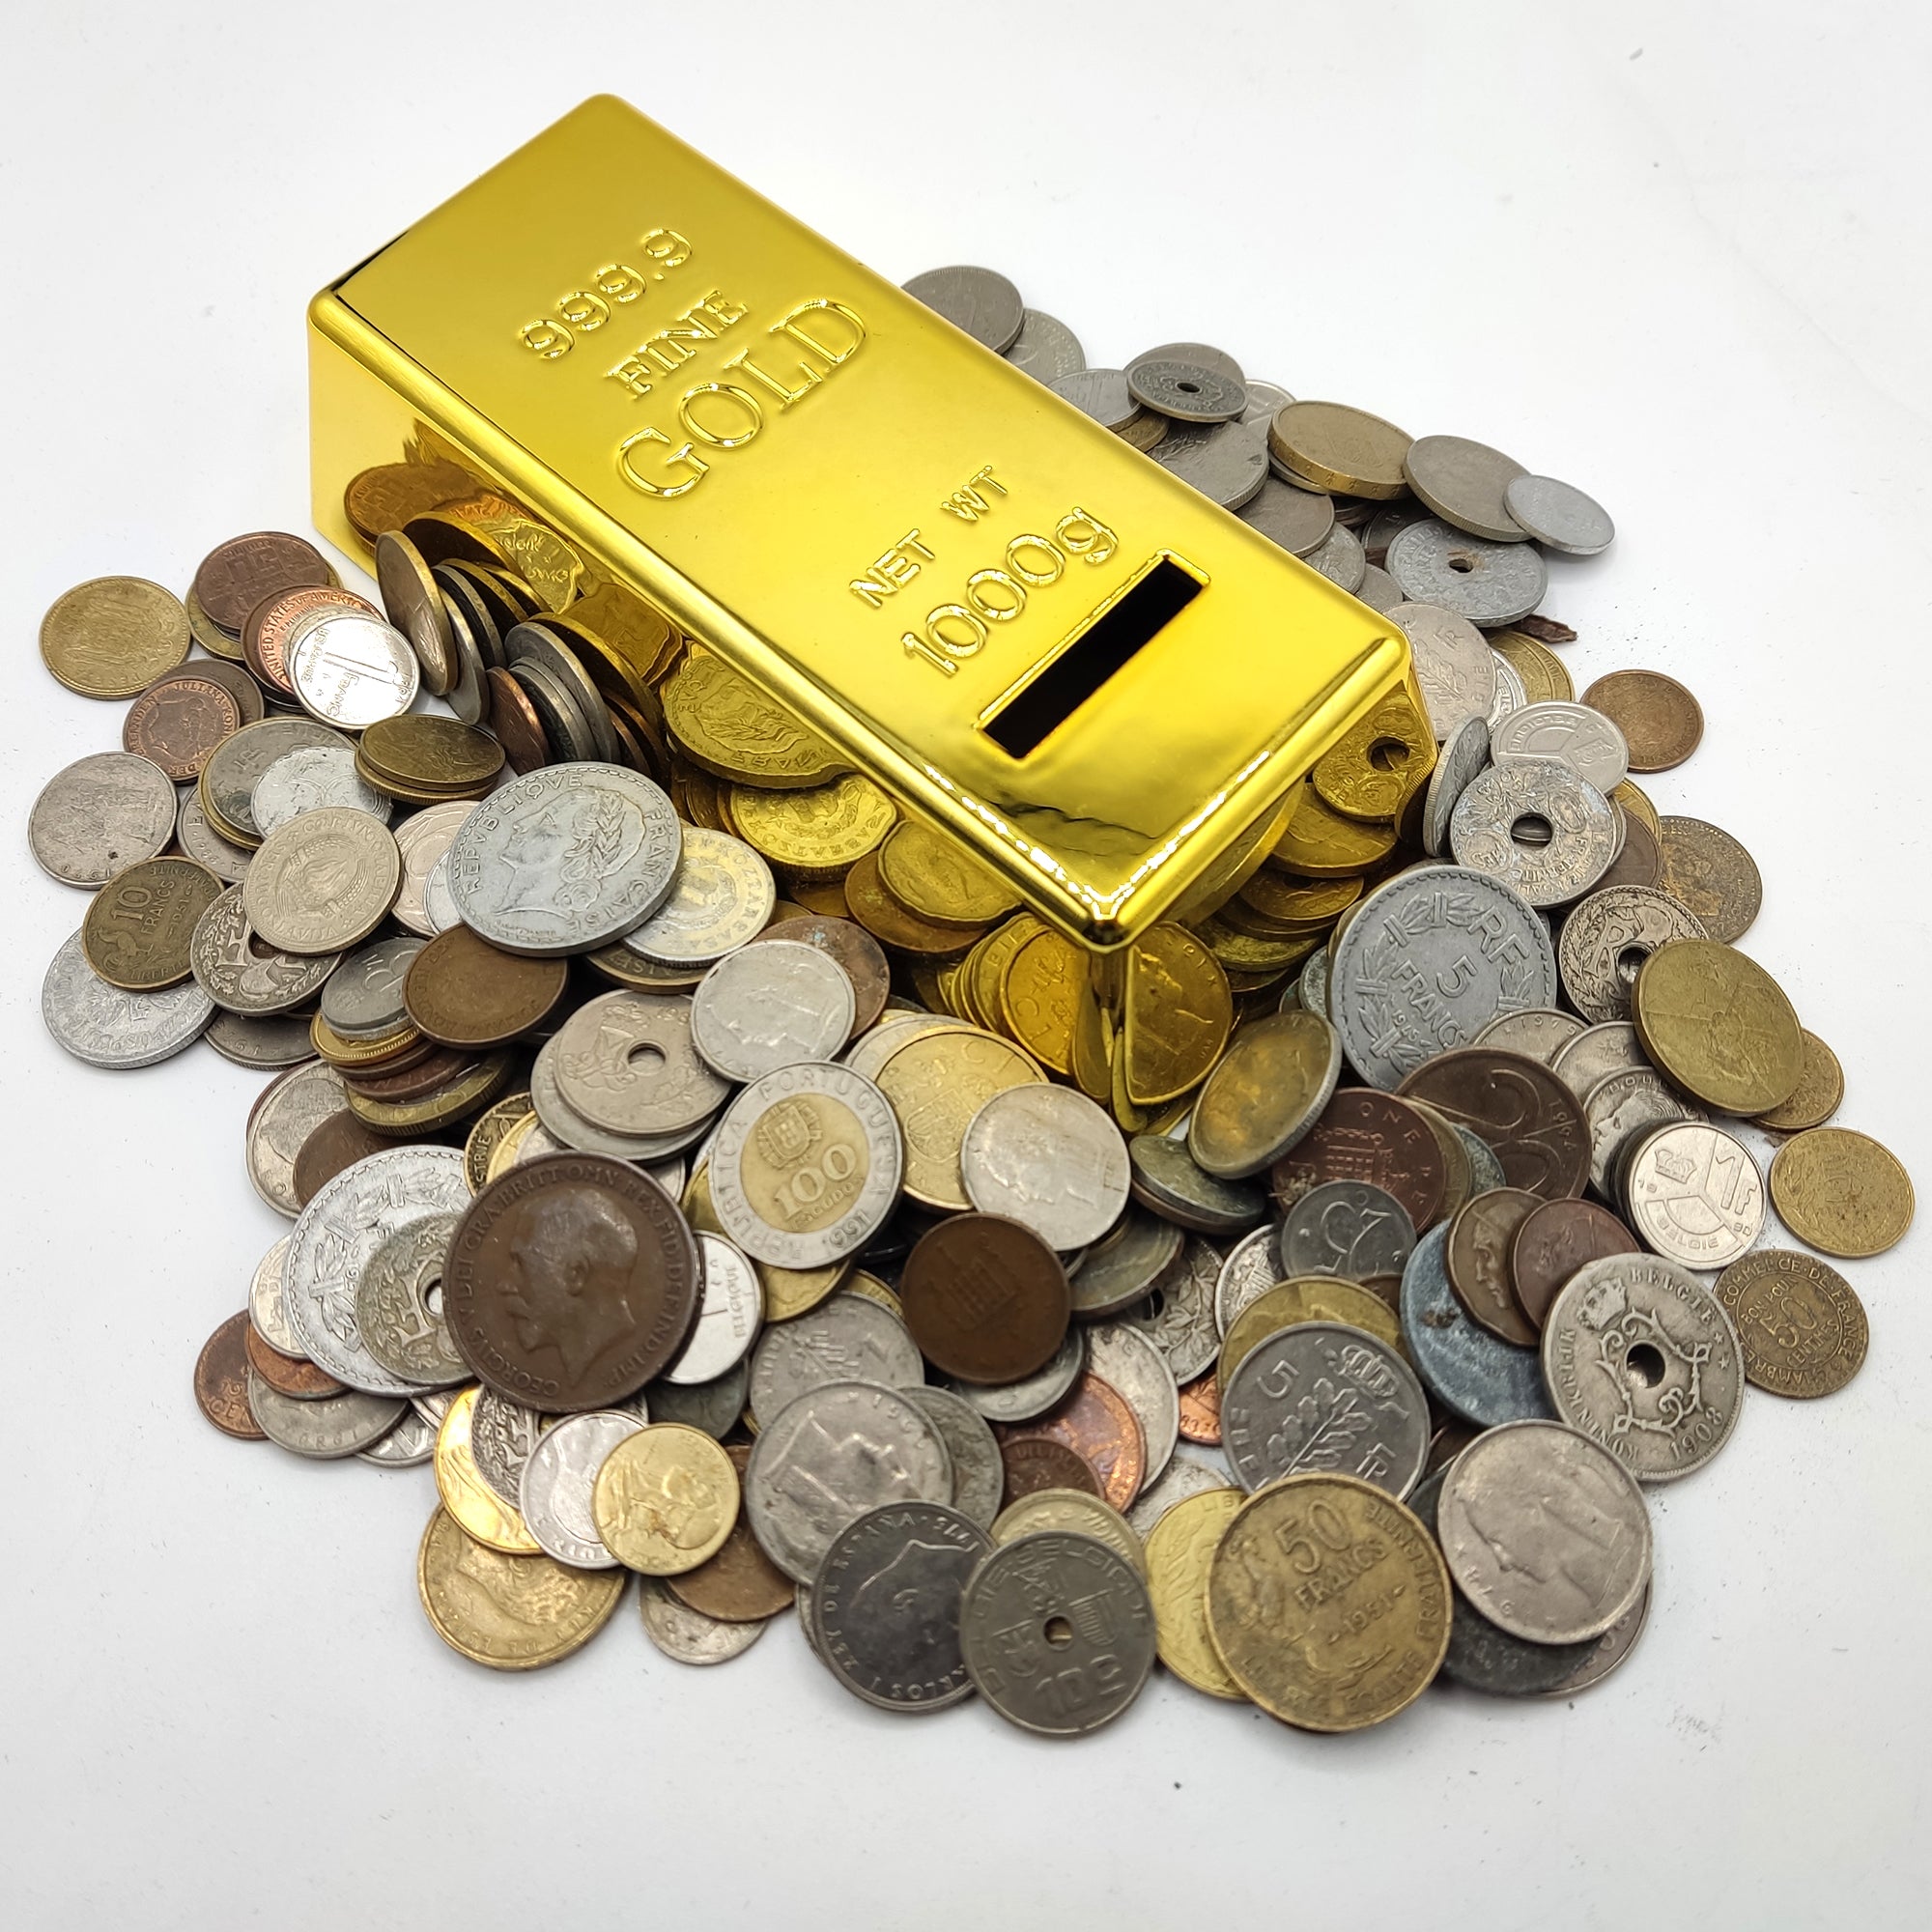 Coin Collection - Collectible Coins for Collectors - Piggy bank gold bar with 1 Kg. of Rare Coins - World Currency Set - Piggy bank gold bar - Old Foreign Currency (COA Included)